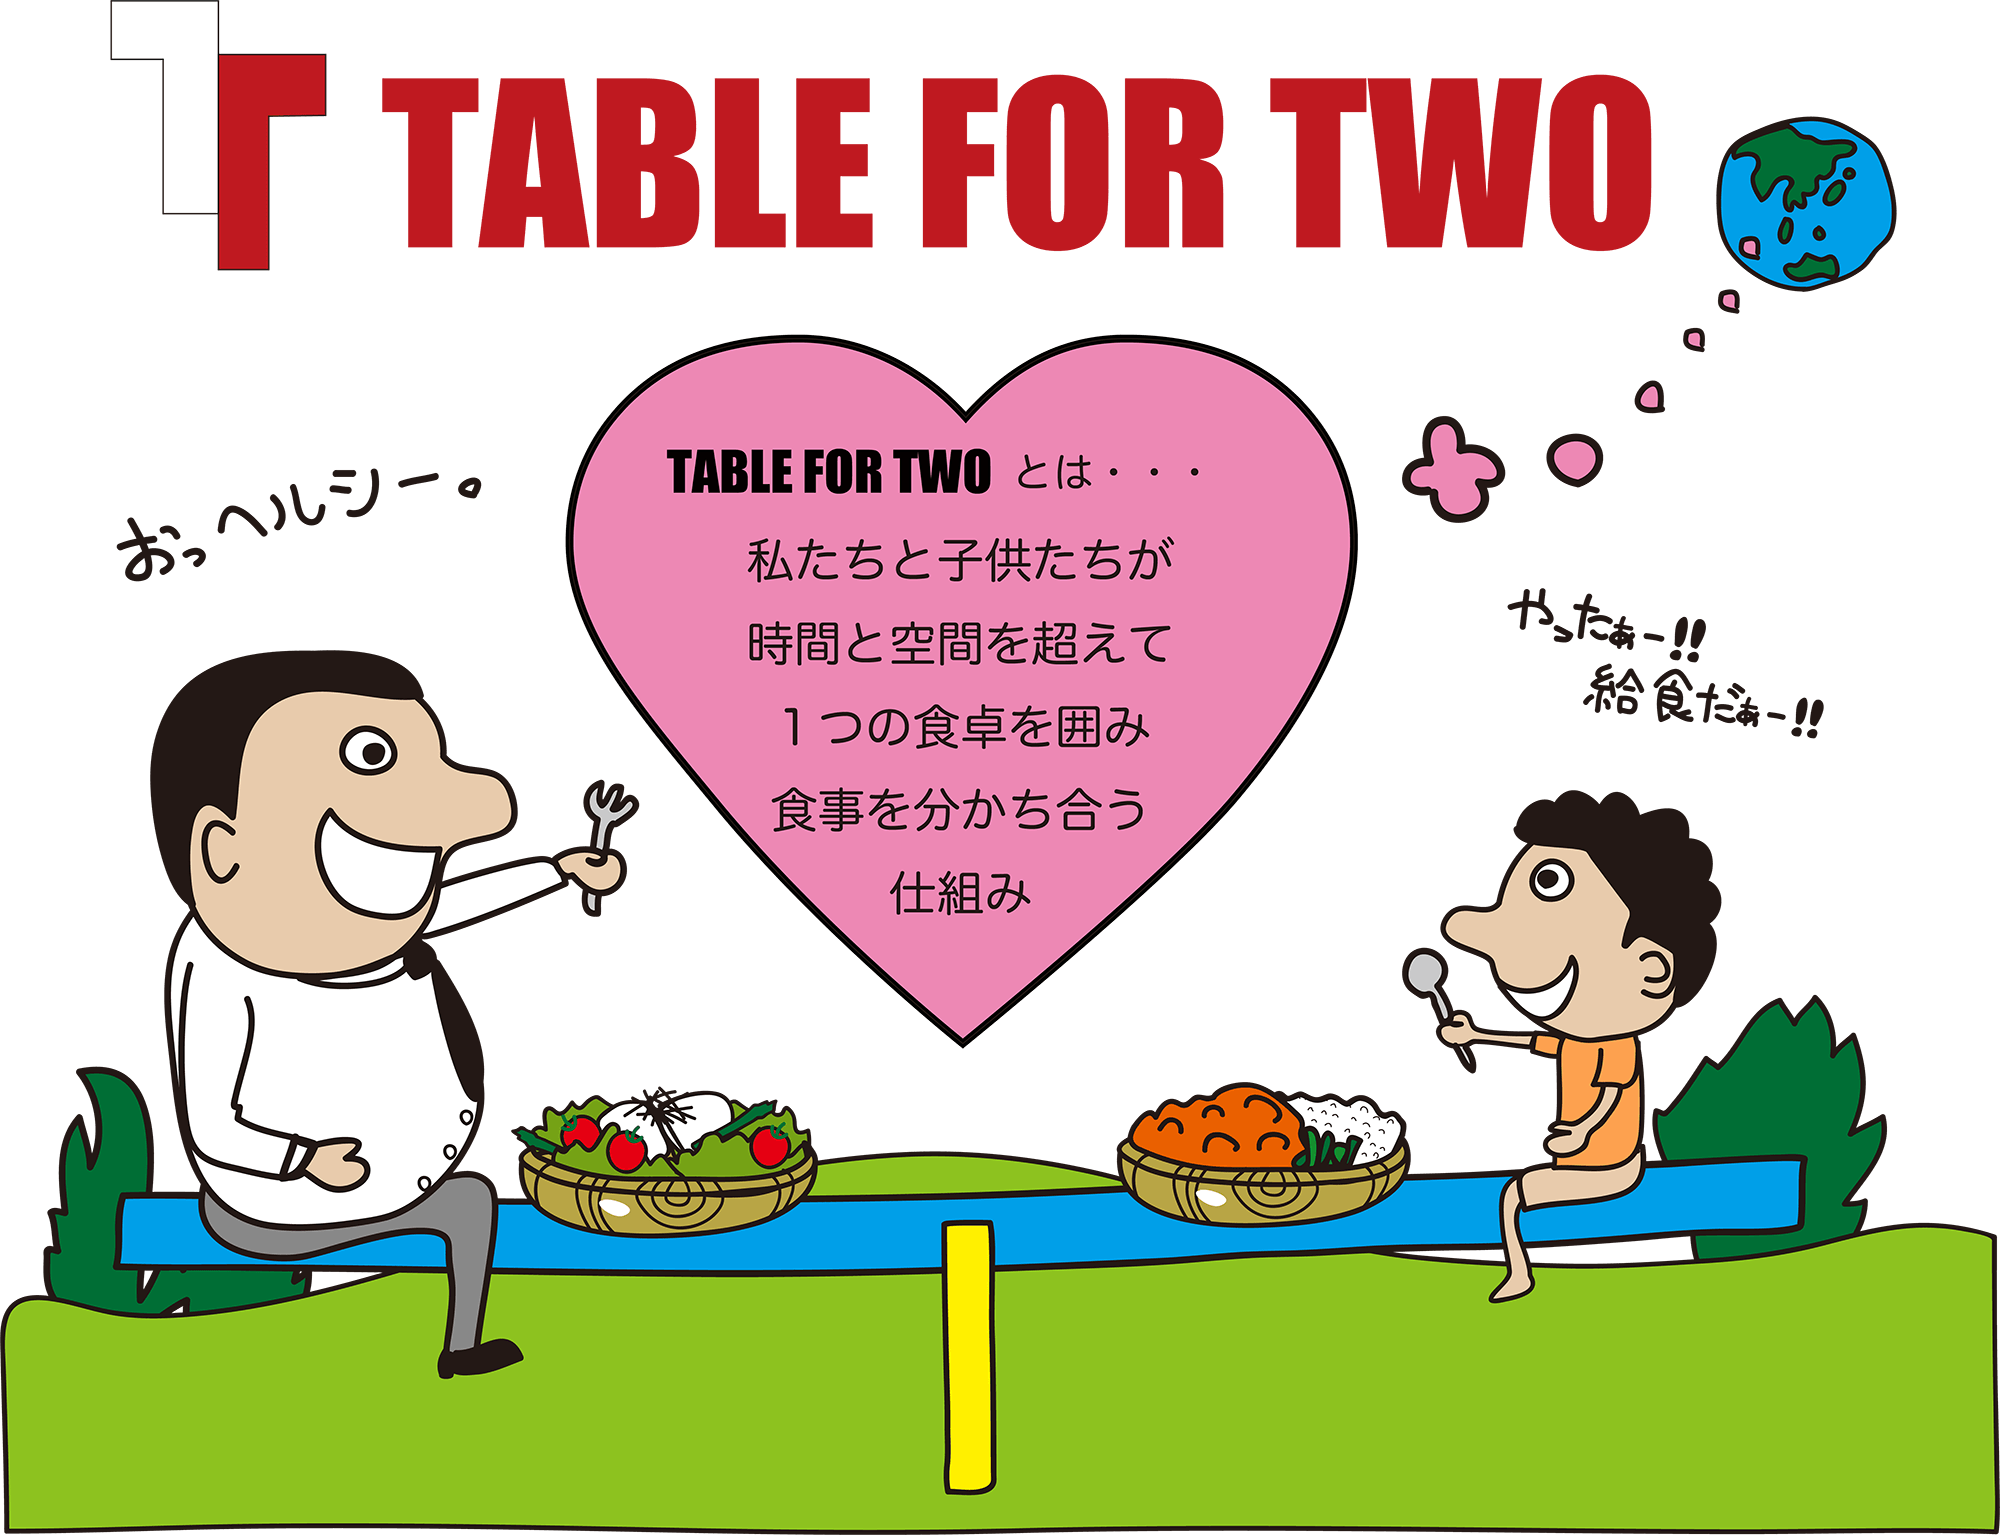 Step Forward Kuis Table For Two